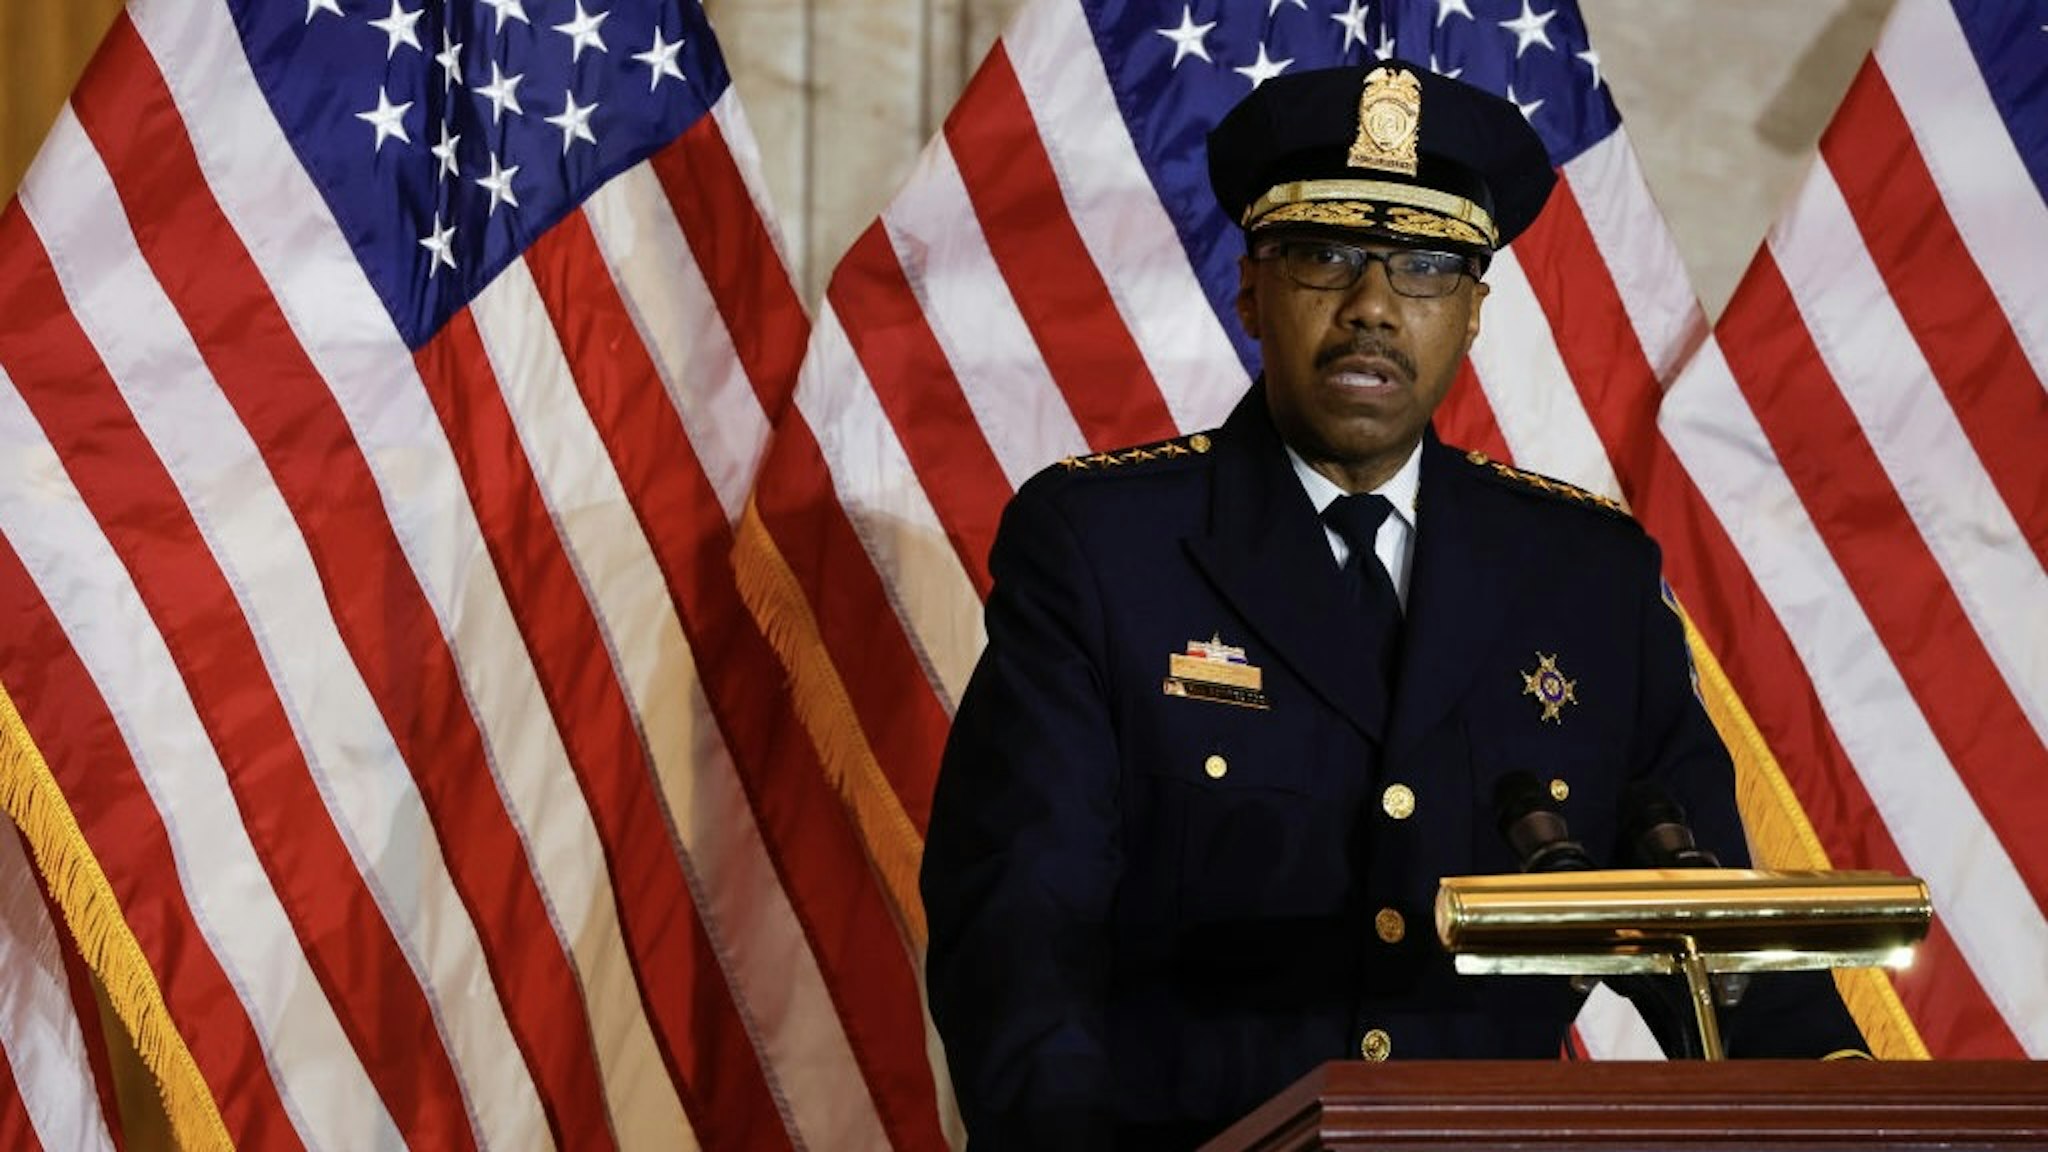 WASHINGTON, DC - DECEMBER 06: District of Columbia Police Chief Robert Contee delivers remarks during a Congressional Gold Medal Ceremony for U.S. Capitol Police and D.C. Metropolitan Police officers in the Rotunda of the U.S. Capitol Building on December 6, 2022 in Washington, DC. Bipartisan and bicameral leadership held the ceremony to award the Congressional Gold Medals to law enforcement officers who protected the U.S. Capitol Building on January 6, 2021. Senate Majority Leader Chuck Schumer (D-NY) and House Minority Leader Kevin McCarthy (R-CA) also attended ceremony. (Photo by Anna Moneymaker/Getty Images) Congressional Gold Medal Ceremony Held To Honor Capitol Police WASHINGTON, DC - DECEMBER 06: District of Columbia Police Chief Robert Contee delivers remarks during a Congressional Gold Medal Ceremony for U.S. Capitol Police and D.C. Metropolitan Police officers in the Rotunda of the U.S. Capitol Building on December 6, 2022 in Washington, DC. Bipartisan and bicameral leadership held the ceremony to award the Congressional Gold Medals to law enforcement officers who protected the U.S. Capitol Building on January 6, 2021. Senate Majority Leader Chuck Schumer (D-NY) and House Minority Leader Kevin McCarthy (R-CA) also attended ceremony. (Photo by Anna Moneymaker/Getty Images) Anna Moneymaker / Staff Photo by Anna Moneymaker/Staff/Getty Images